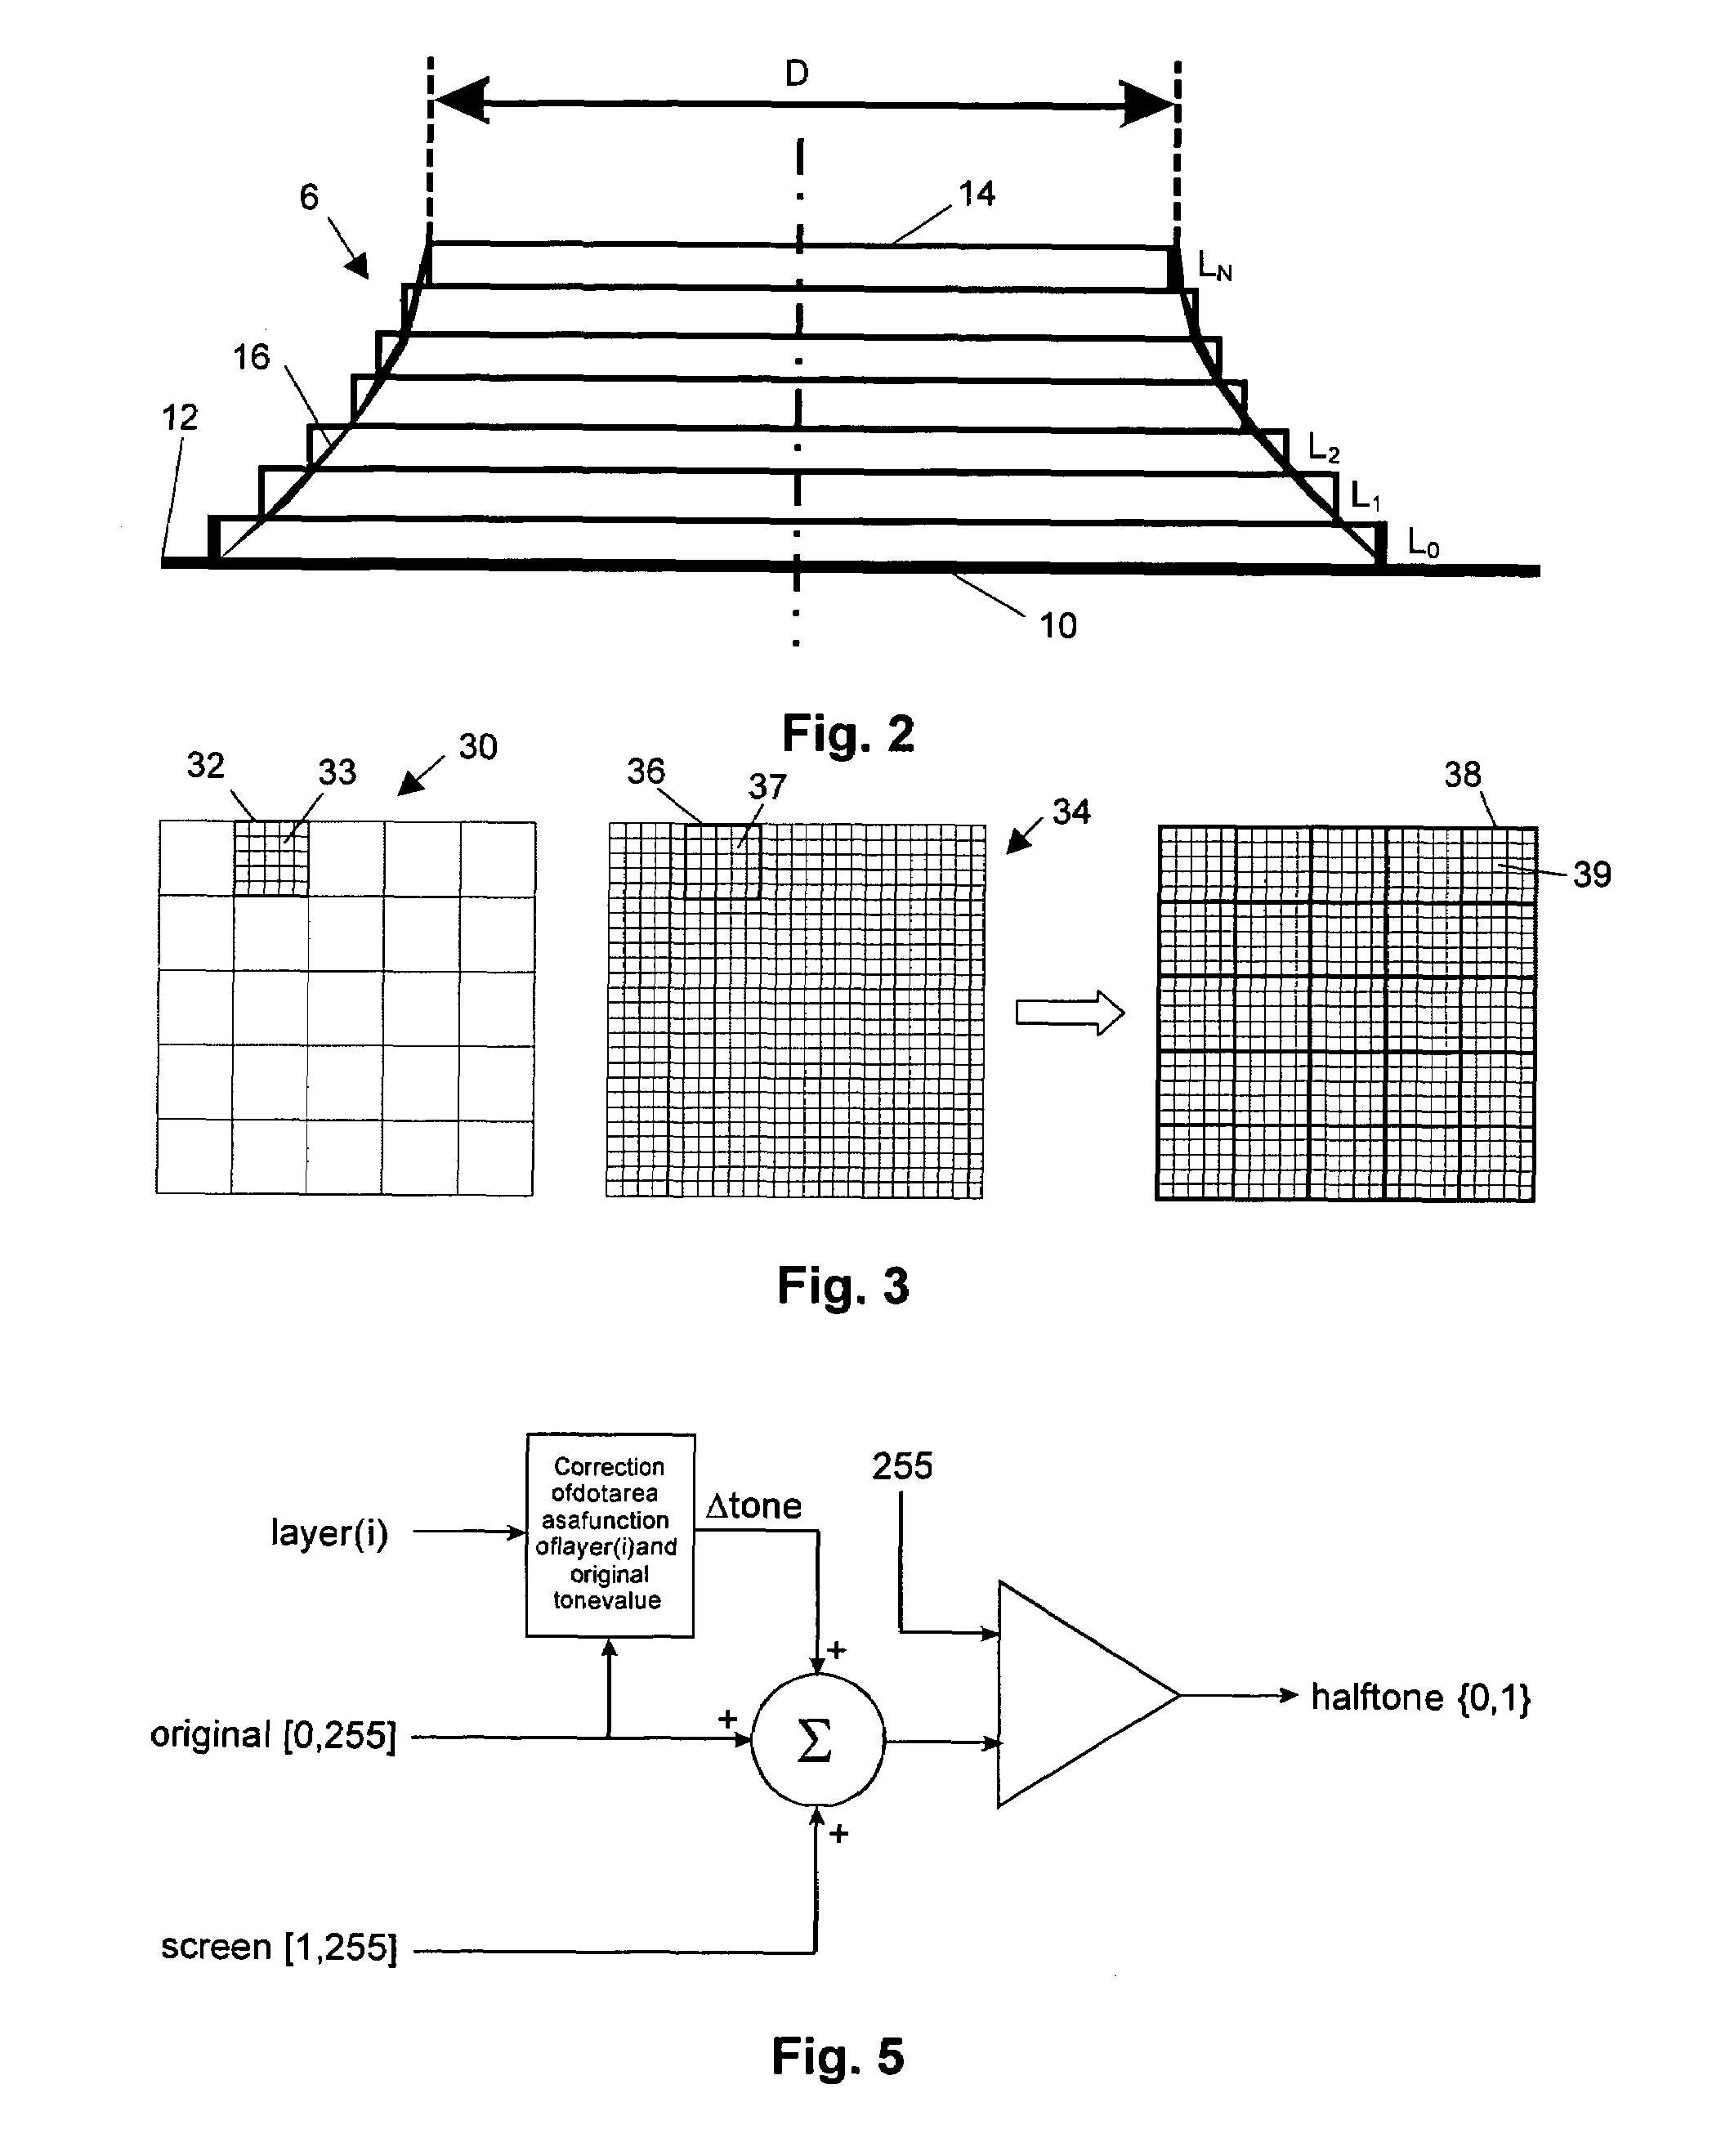 Method and apparatus for creating 3D-prints and a 3-D printing system